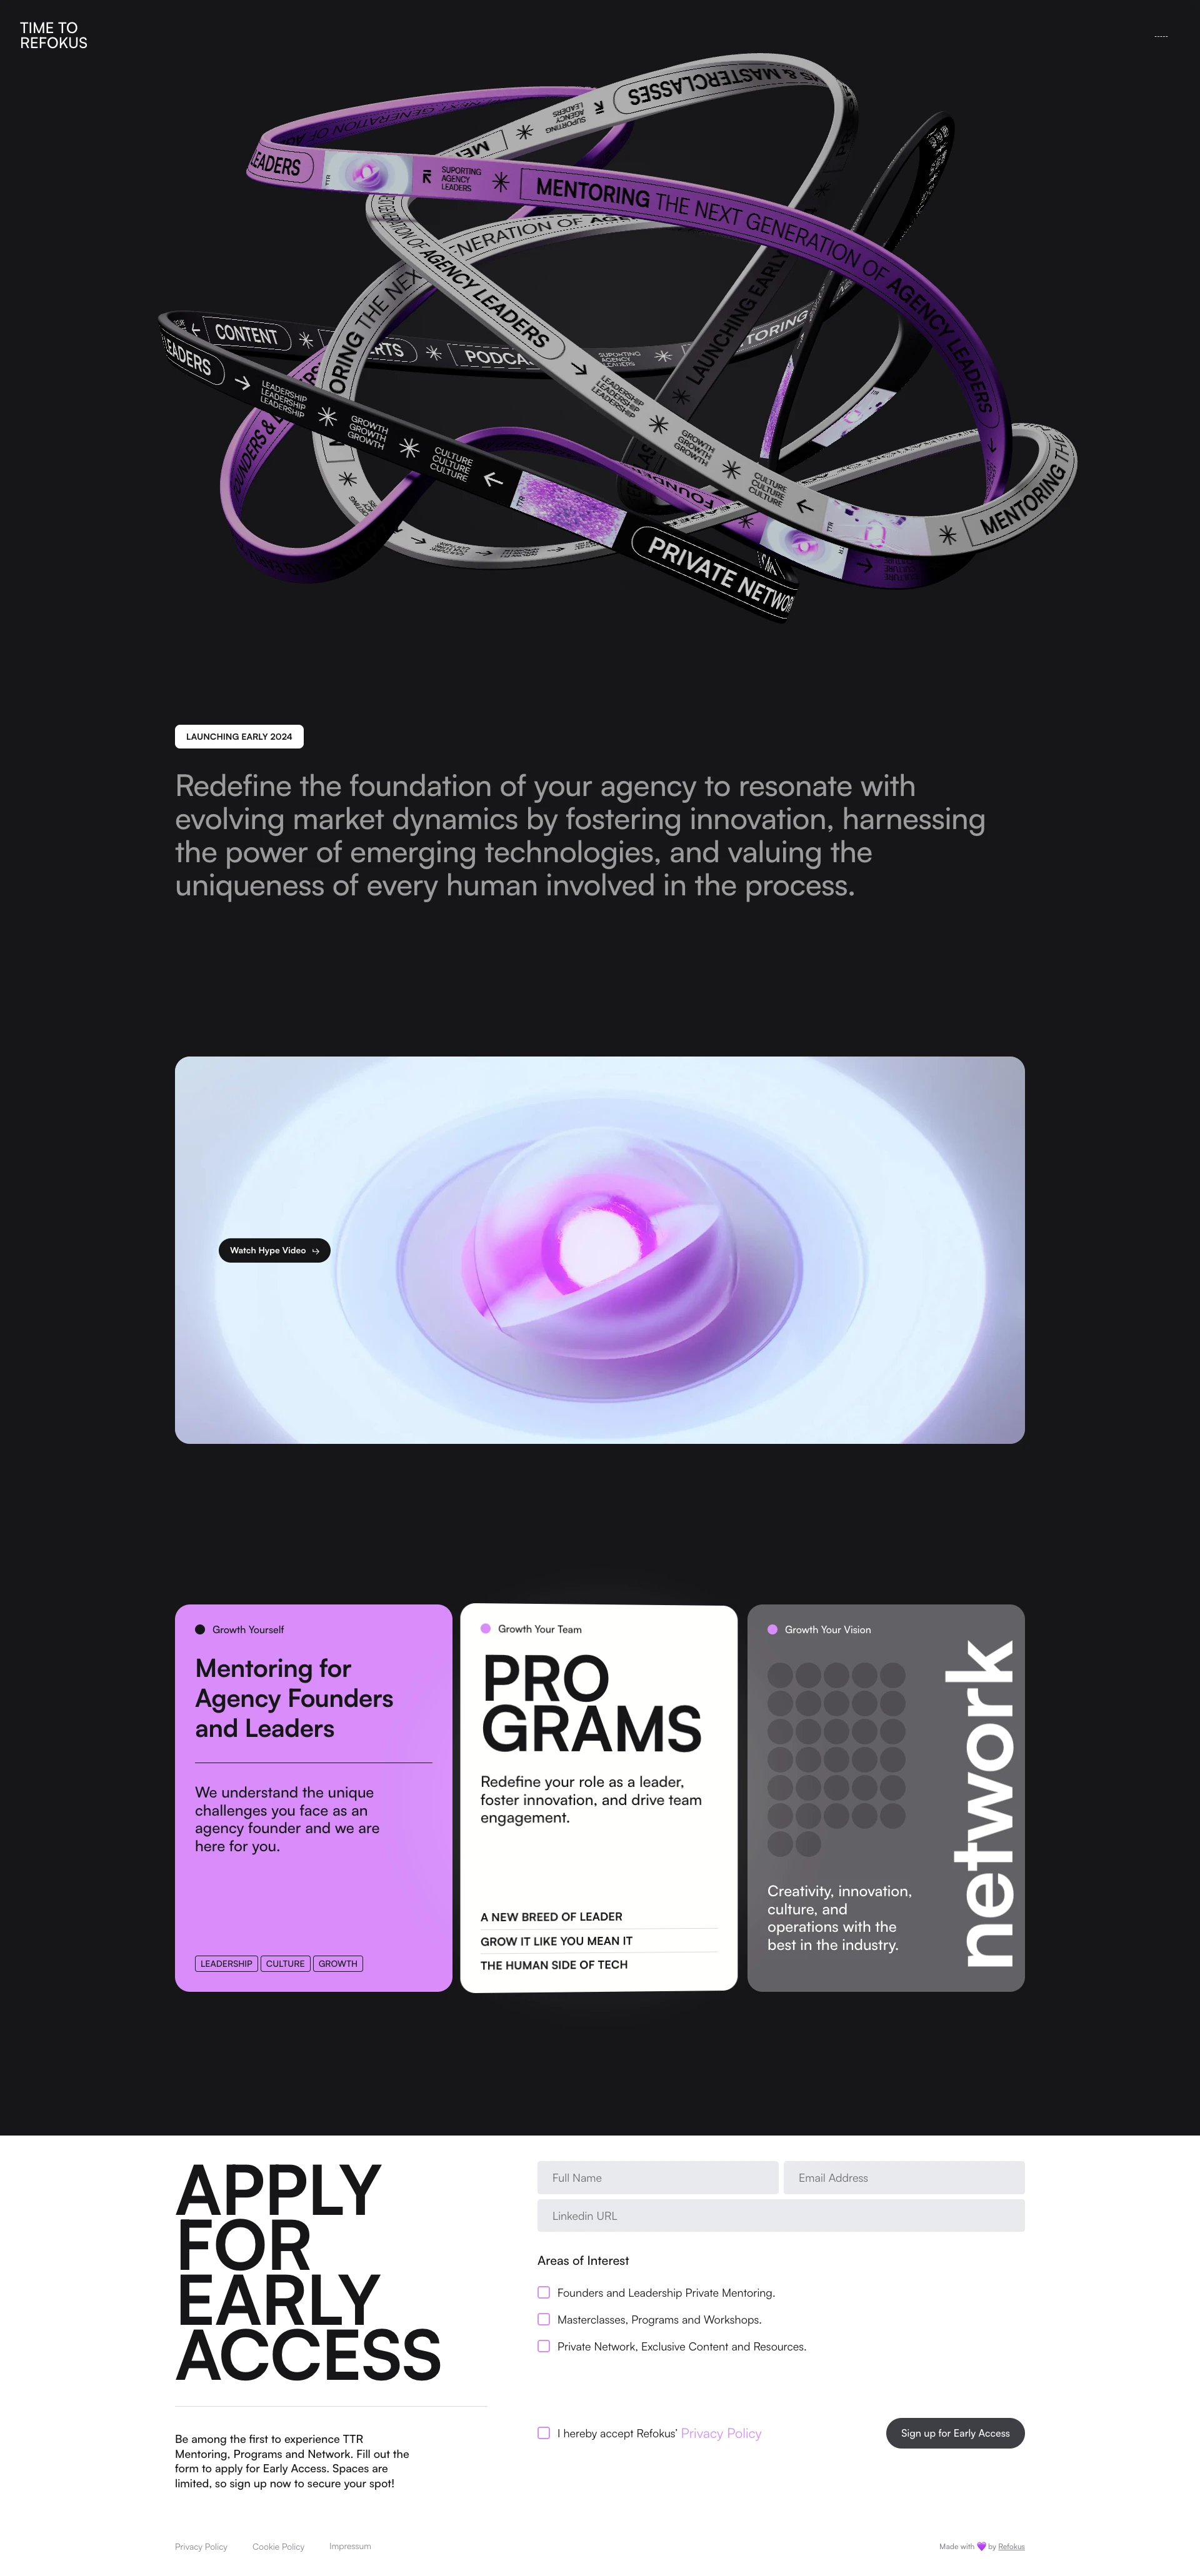 Time To Refokus Landing Page Example: Redefine the foundation of your agency to resonate with evolving market dynamics by fostering innovation, harnessing the power of emerging technologies, and valuing the uniqueness of every human involved in the process.